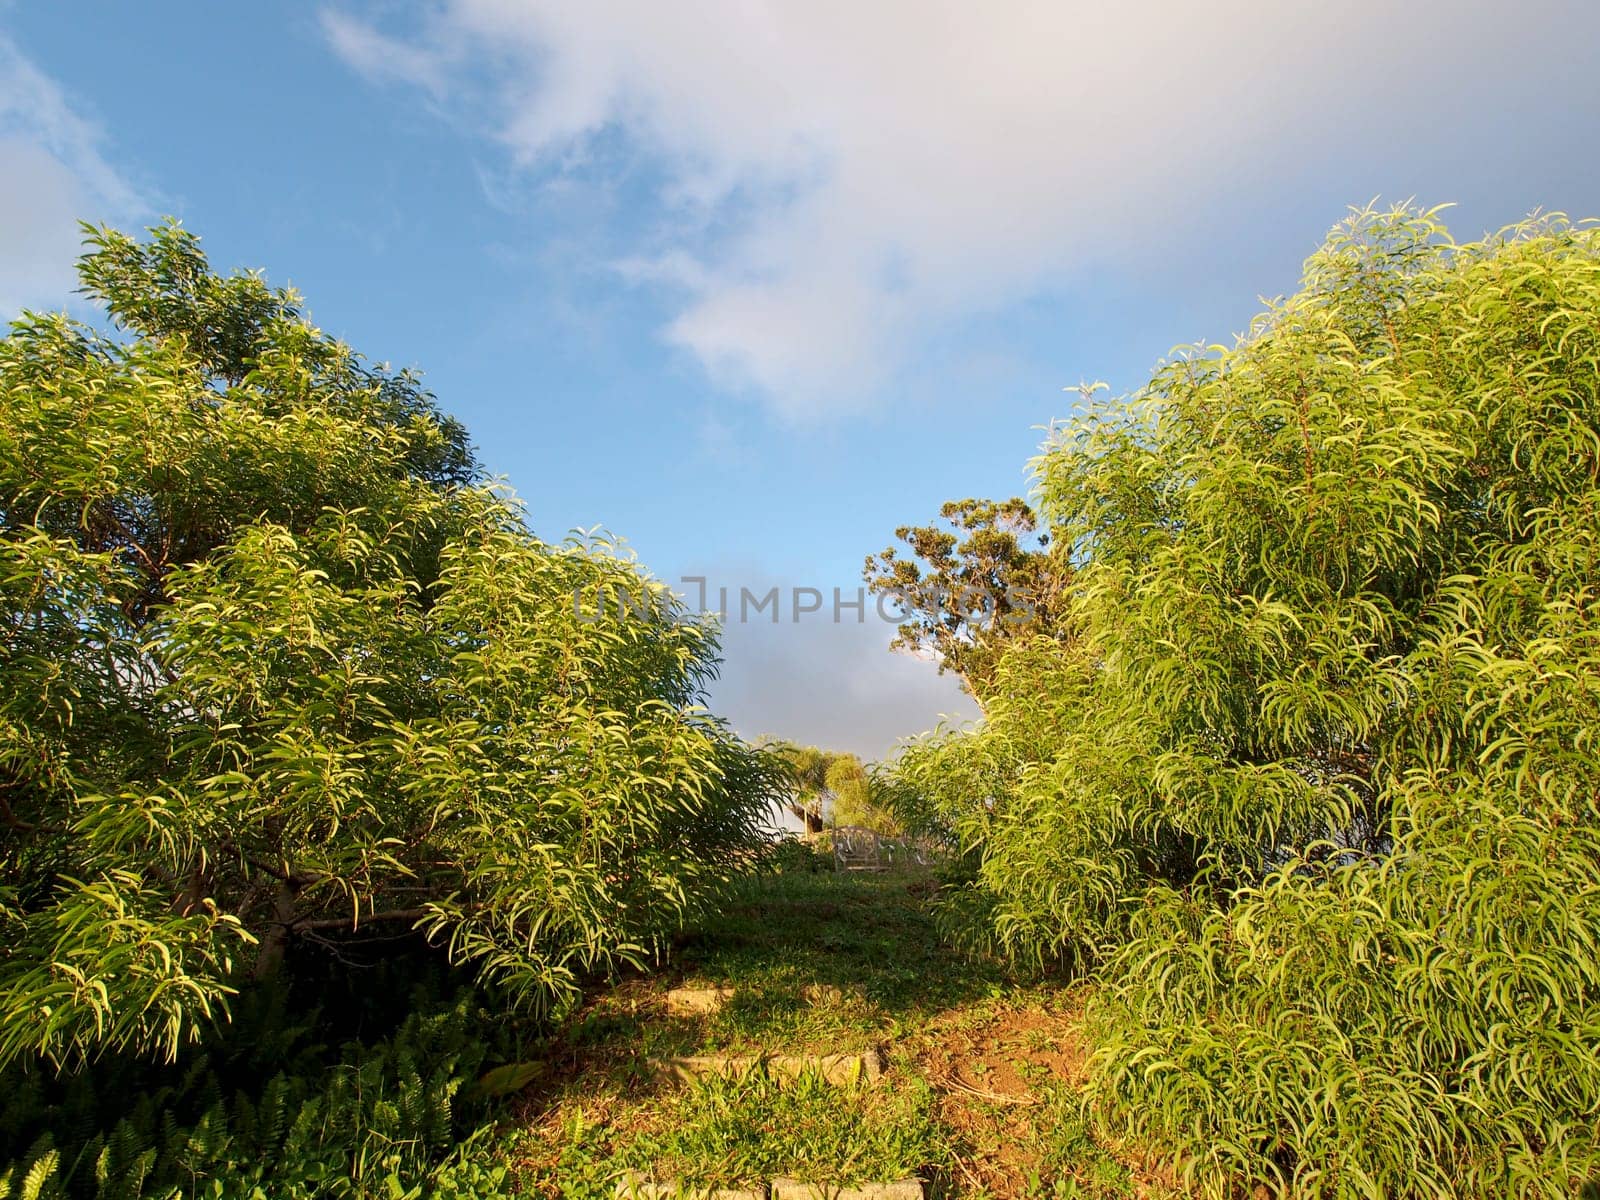 Vibrant and lush greenery under a partly cloudy sky at Tantalus, a scenic hilltop near Honolulu. The photo shows various types of vegetation, including trees and shrubs, and a clear path leading towards the background. The photo also shows a glimpse of the mountains in the distance under the clouds.